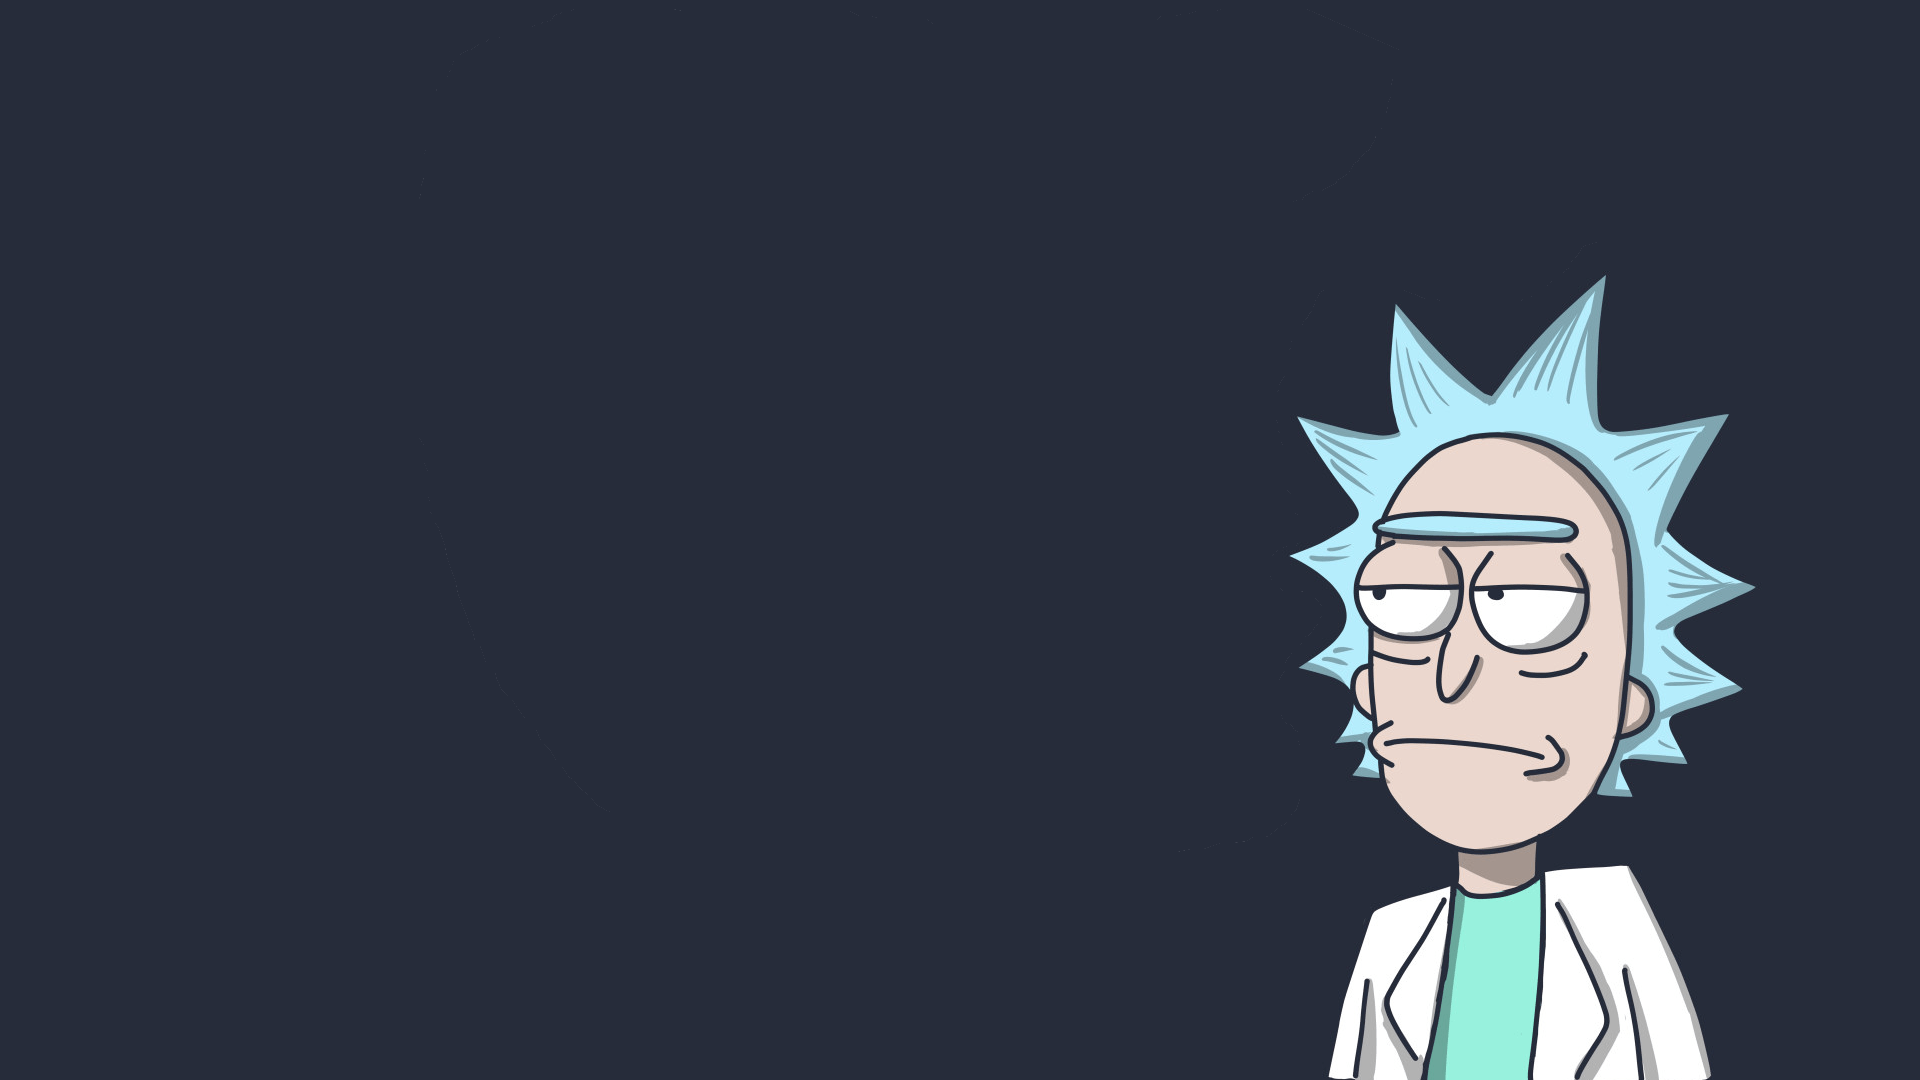 New Rick And Morty Hd 2021 Wallpapers